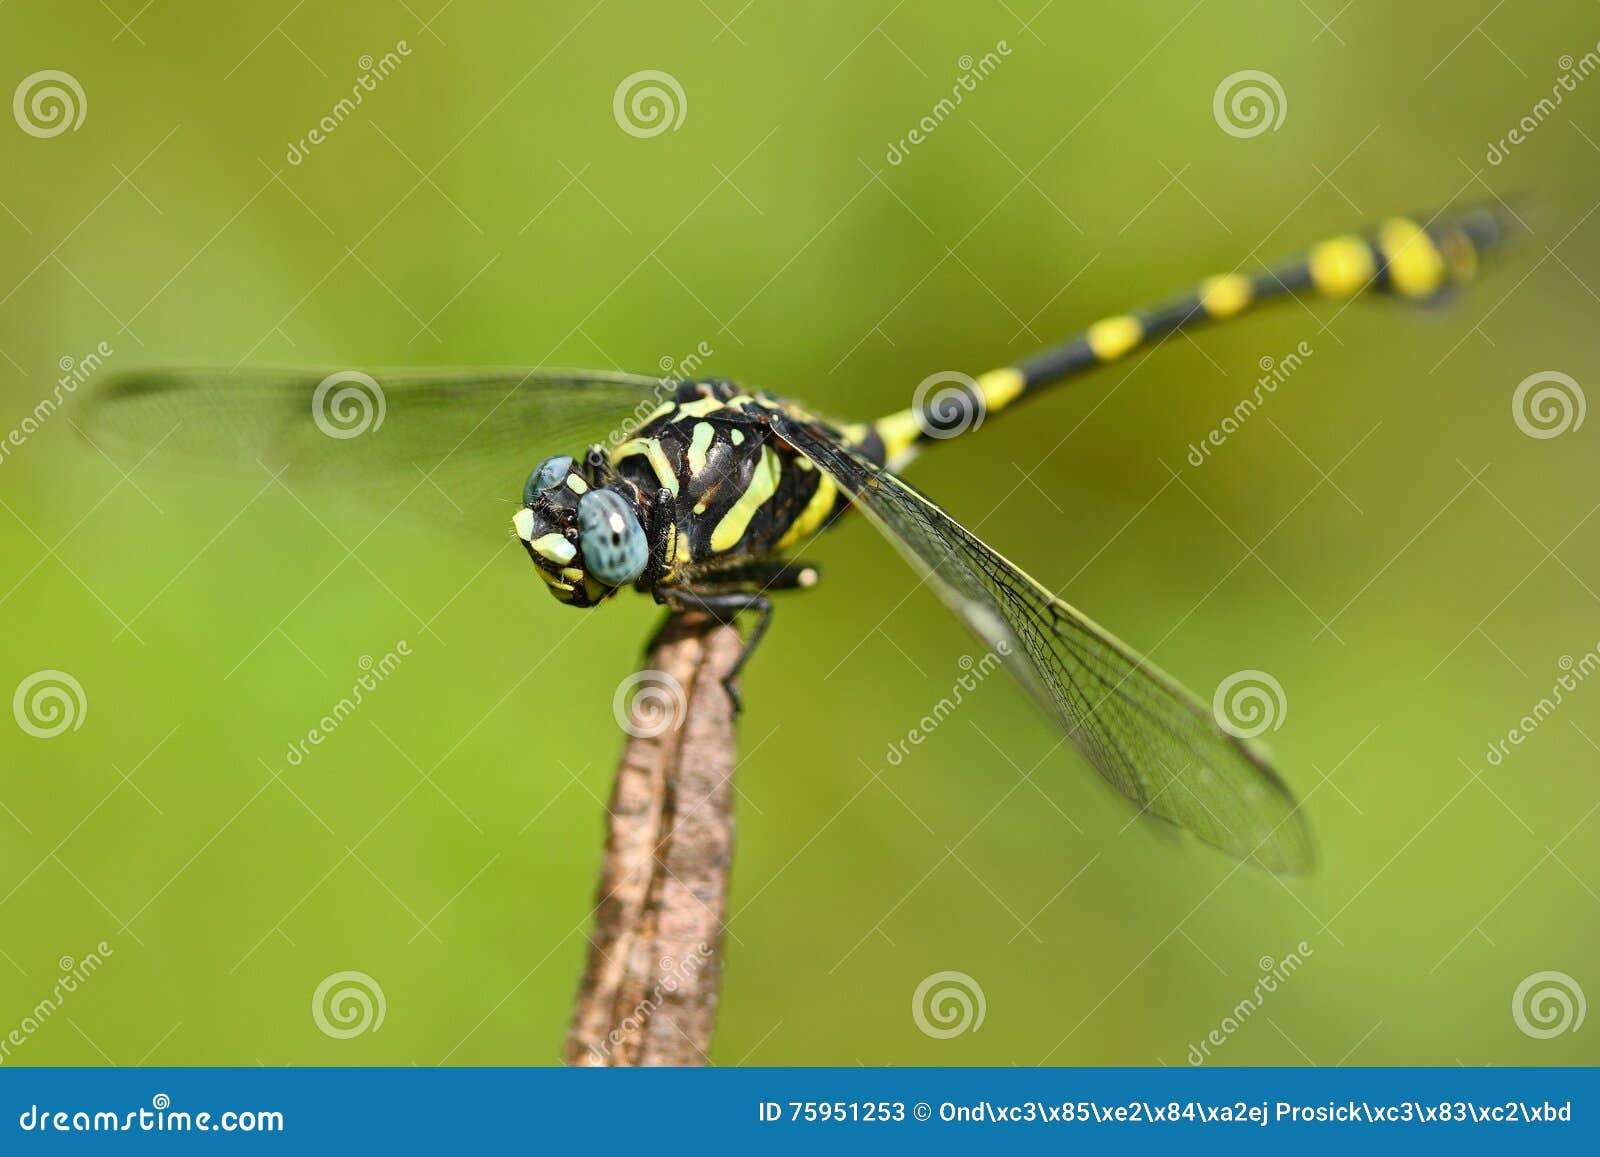 dragonfly from sri lanka. rapacious flangetail, ictinogomphus rapax, sitting on the green leaves. beautiful dragon fly in the